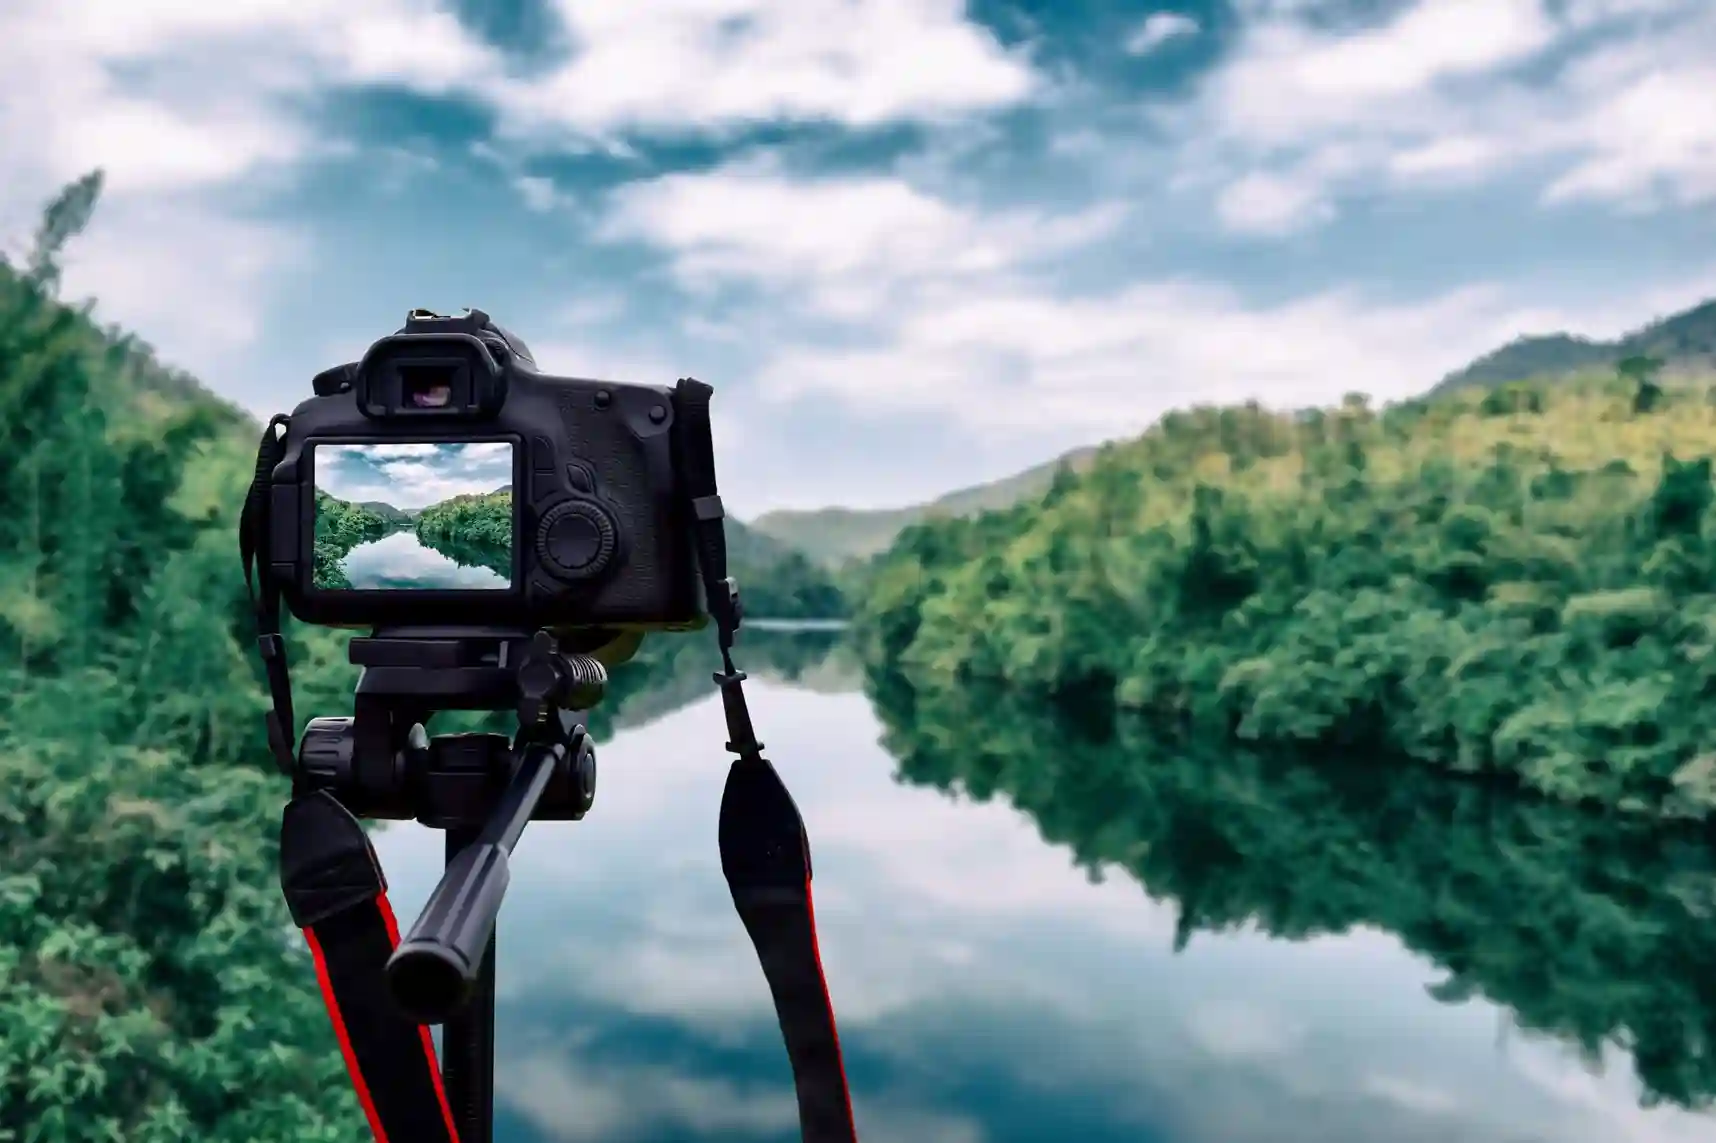 A camera on a tripod capturing a scenic river view